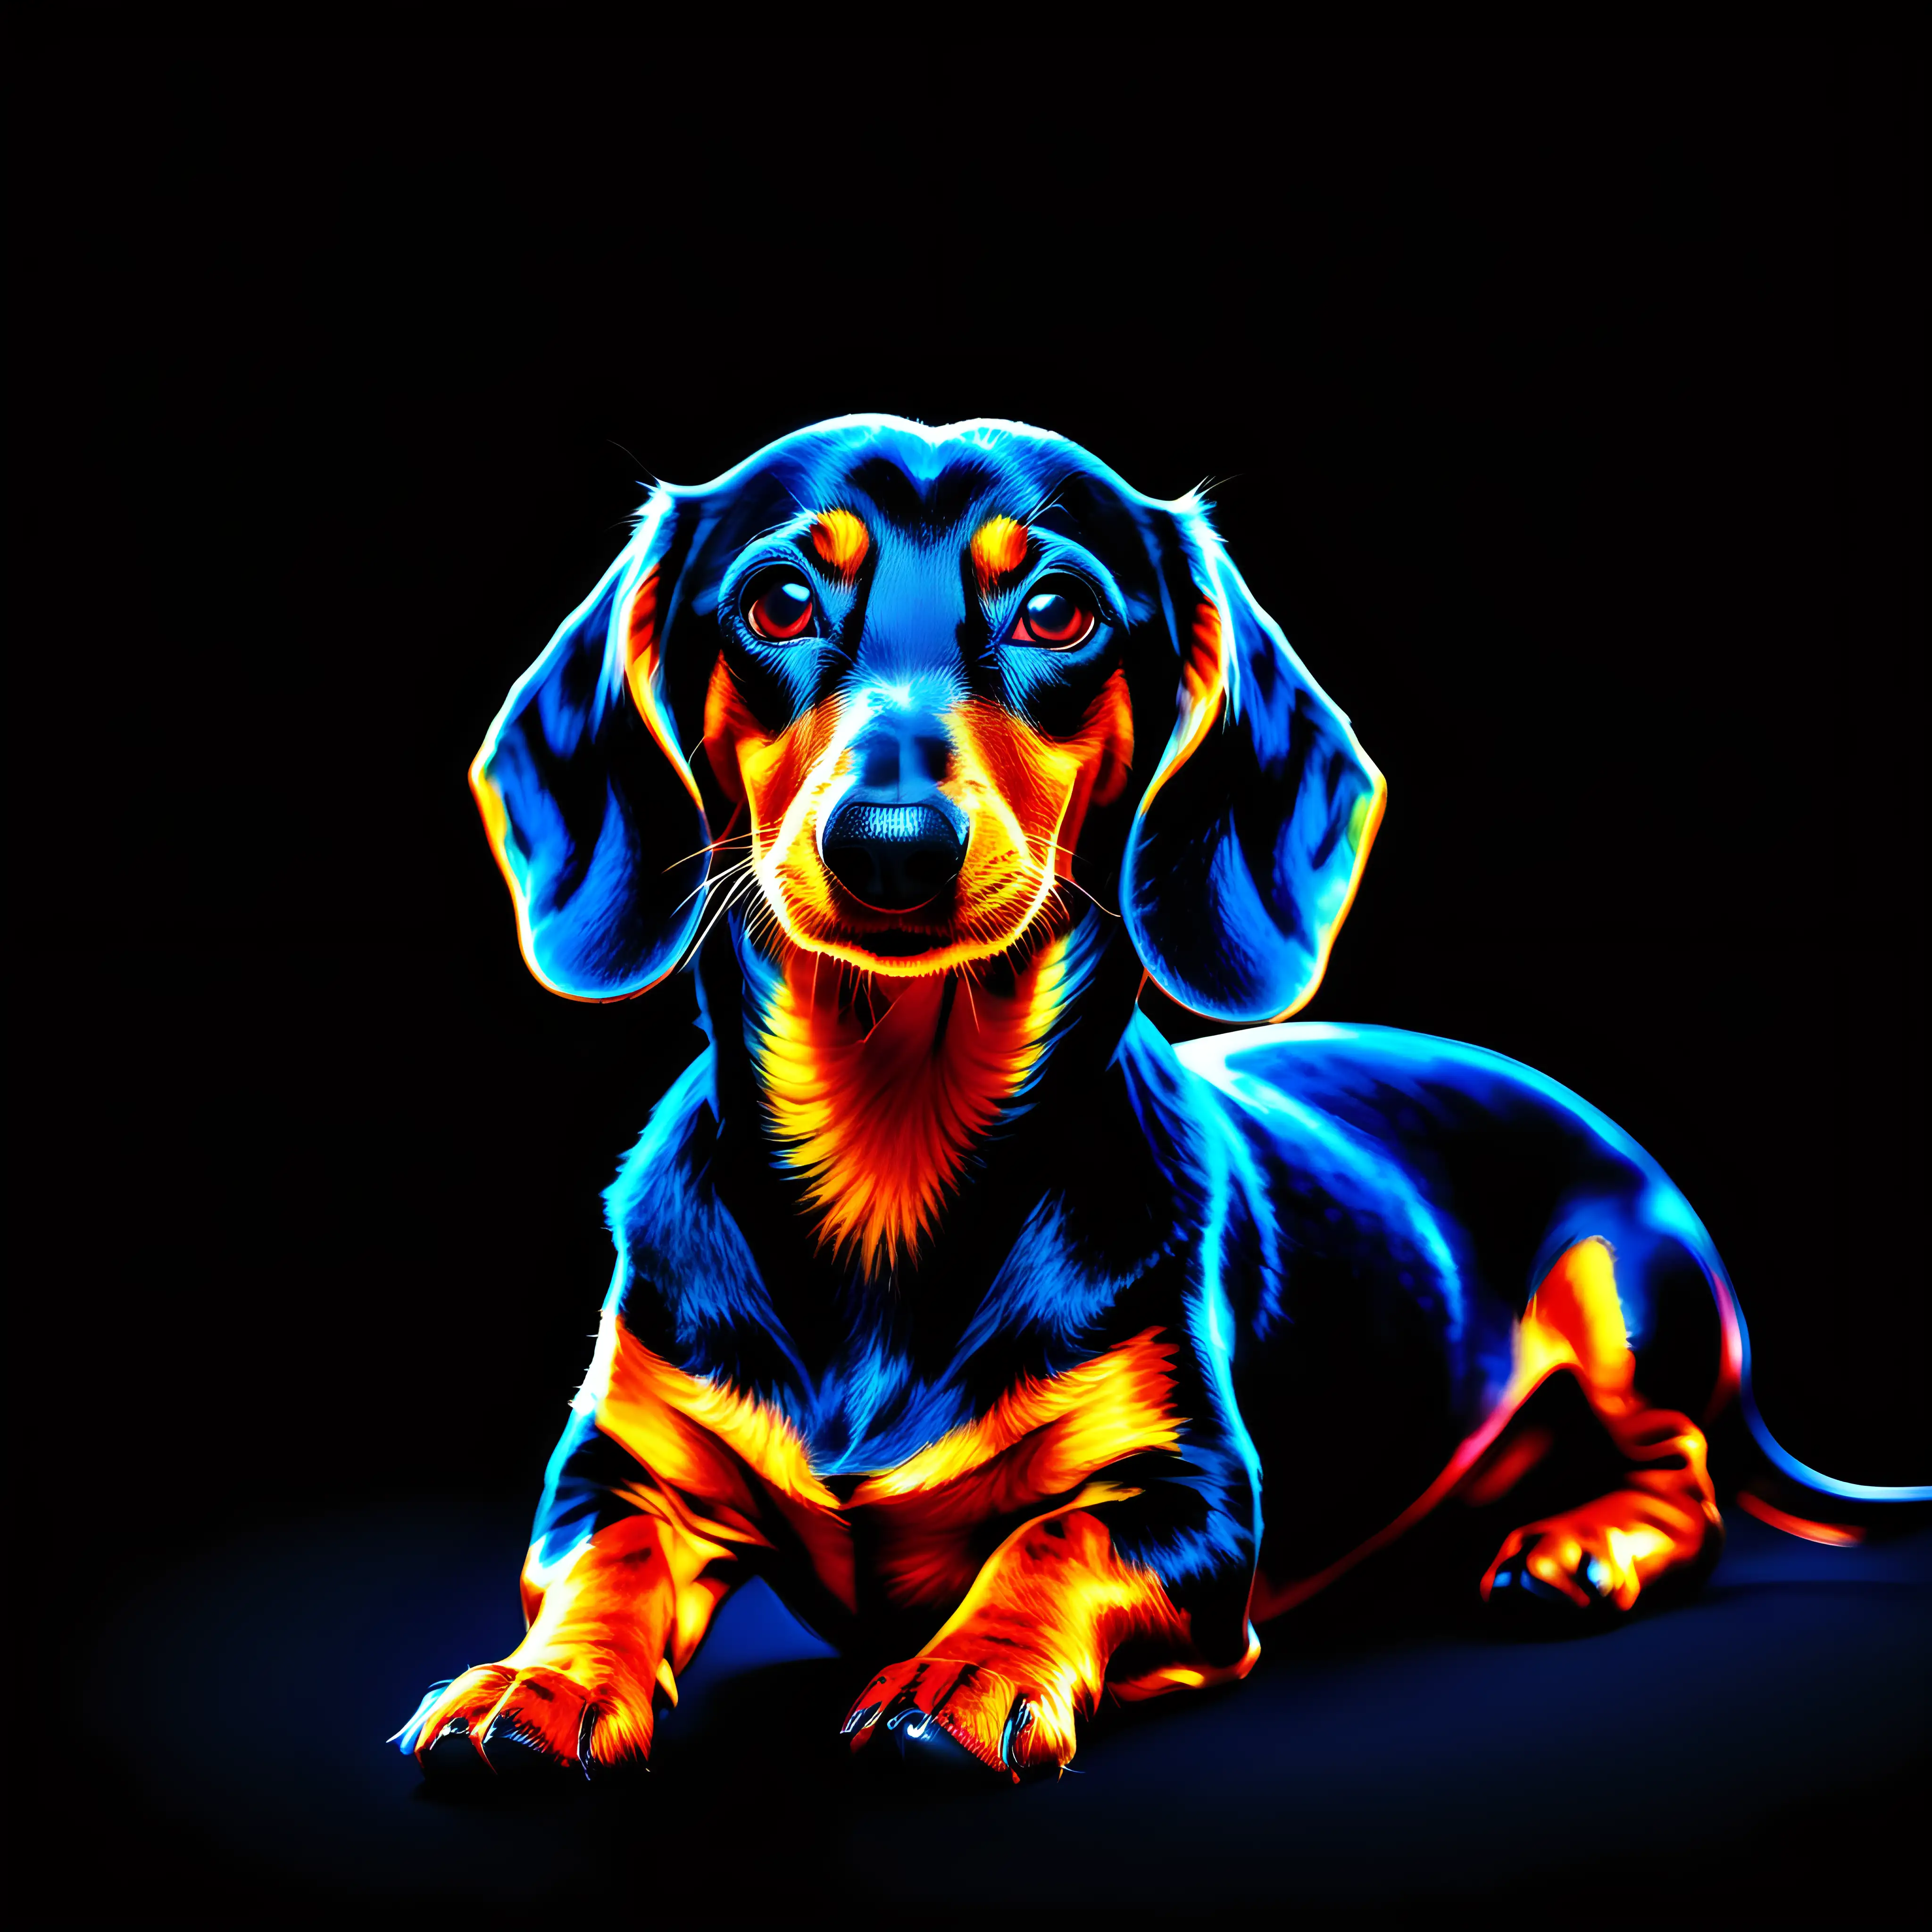 abstract art colorful neon 4k daschund, plain black background, lying down, side view, happy look on its face